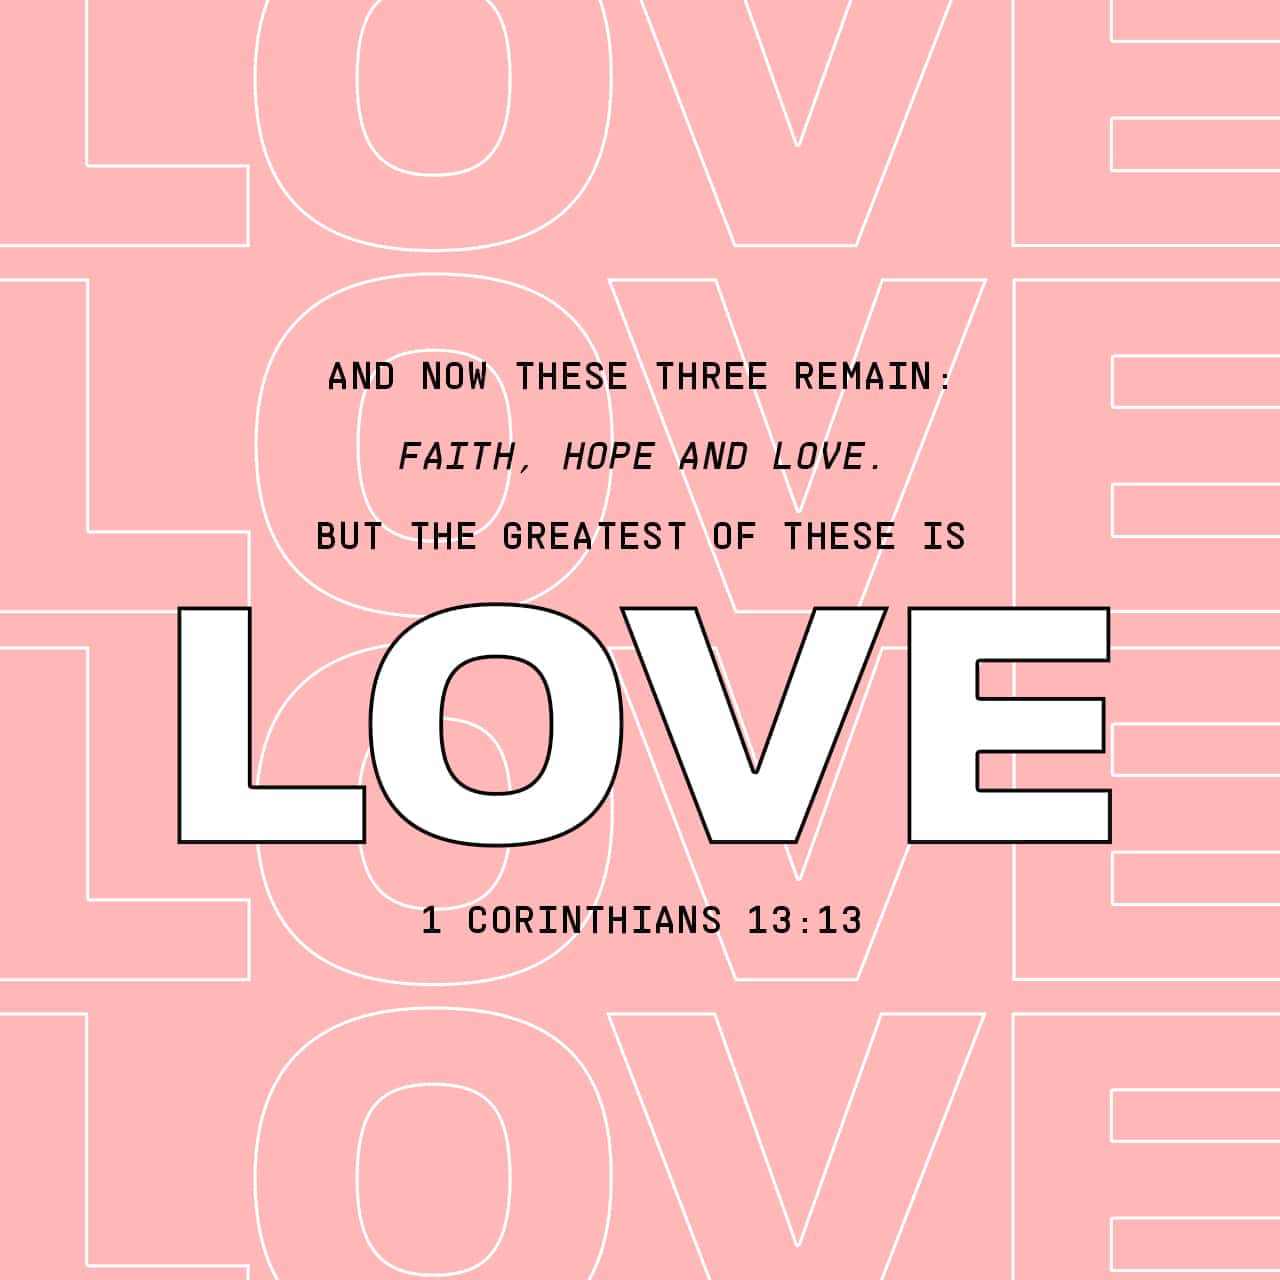 1 Corinthians 13 13 But Now Faith Hope Love Abide These Three But The Greatest Of These Is Love But For Right Now Until That Completeness We Have Three Things To Do To